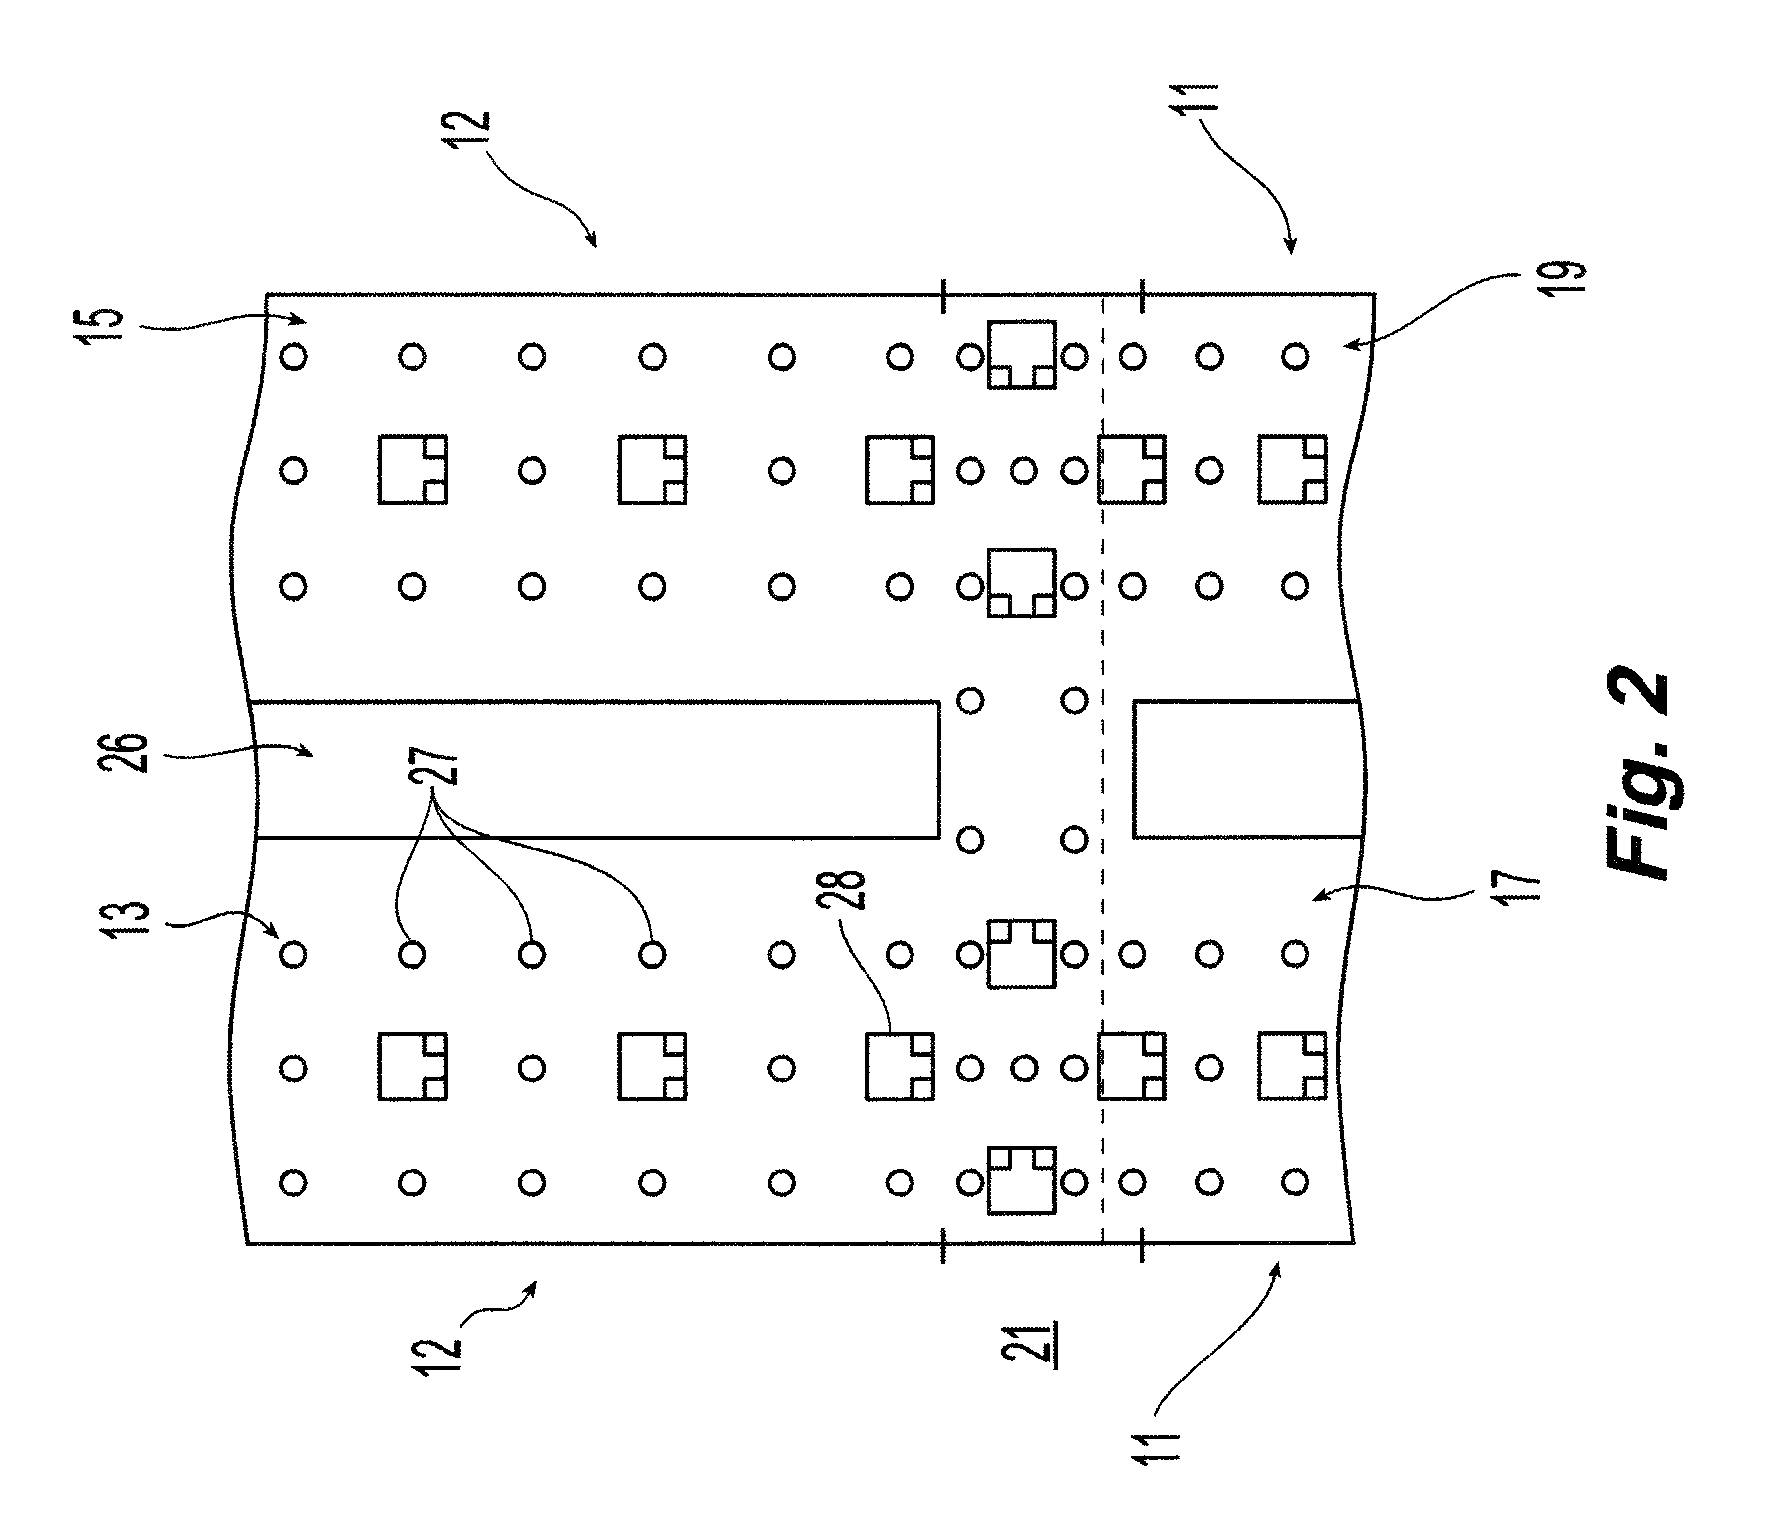 Air cargo power drive unit for detecting motion of an overlying cargo container